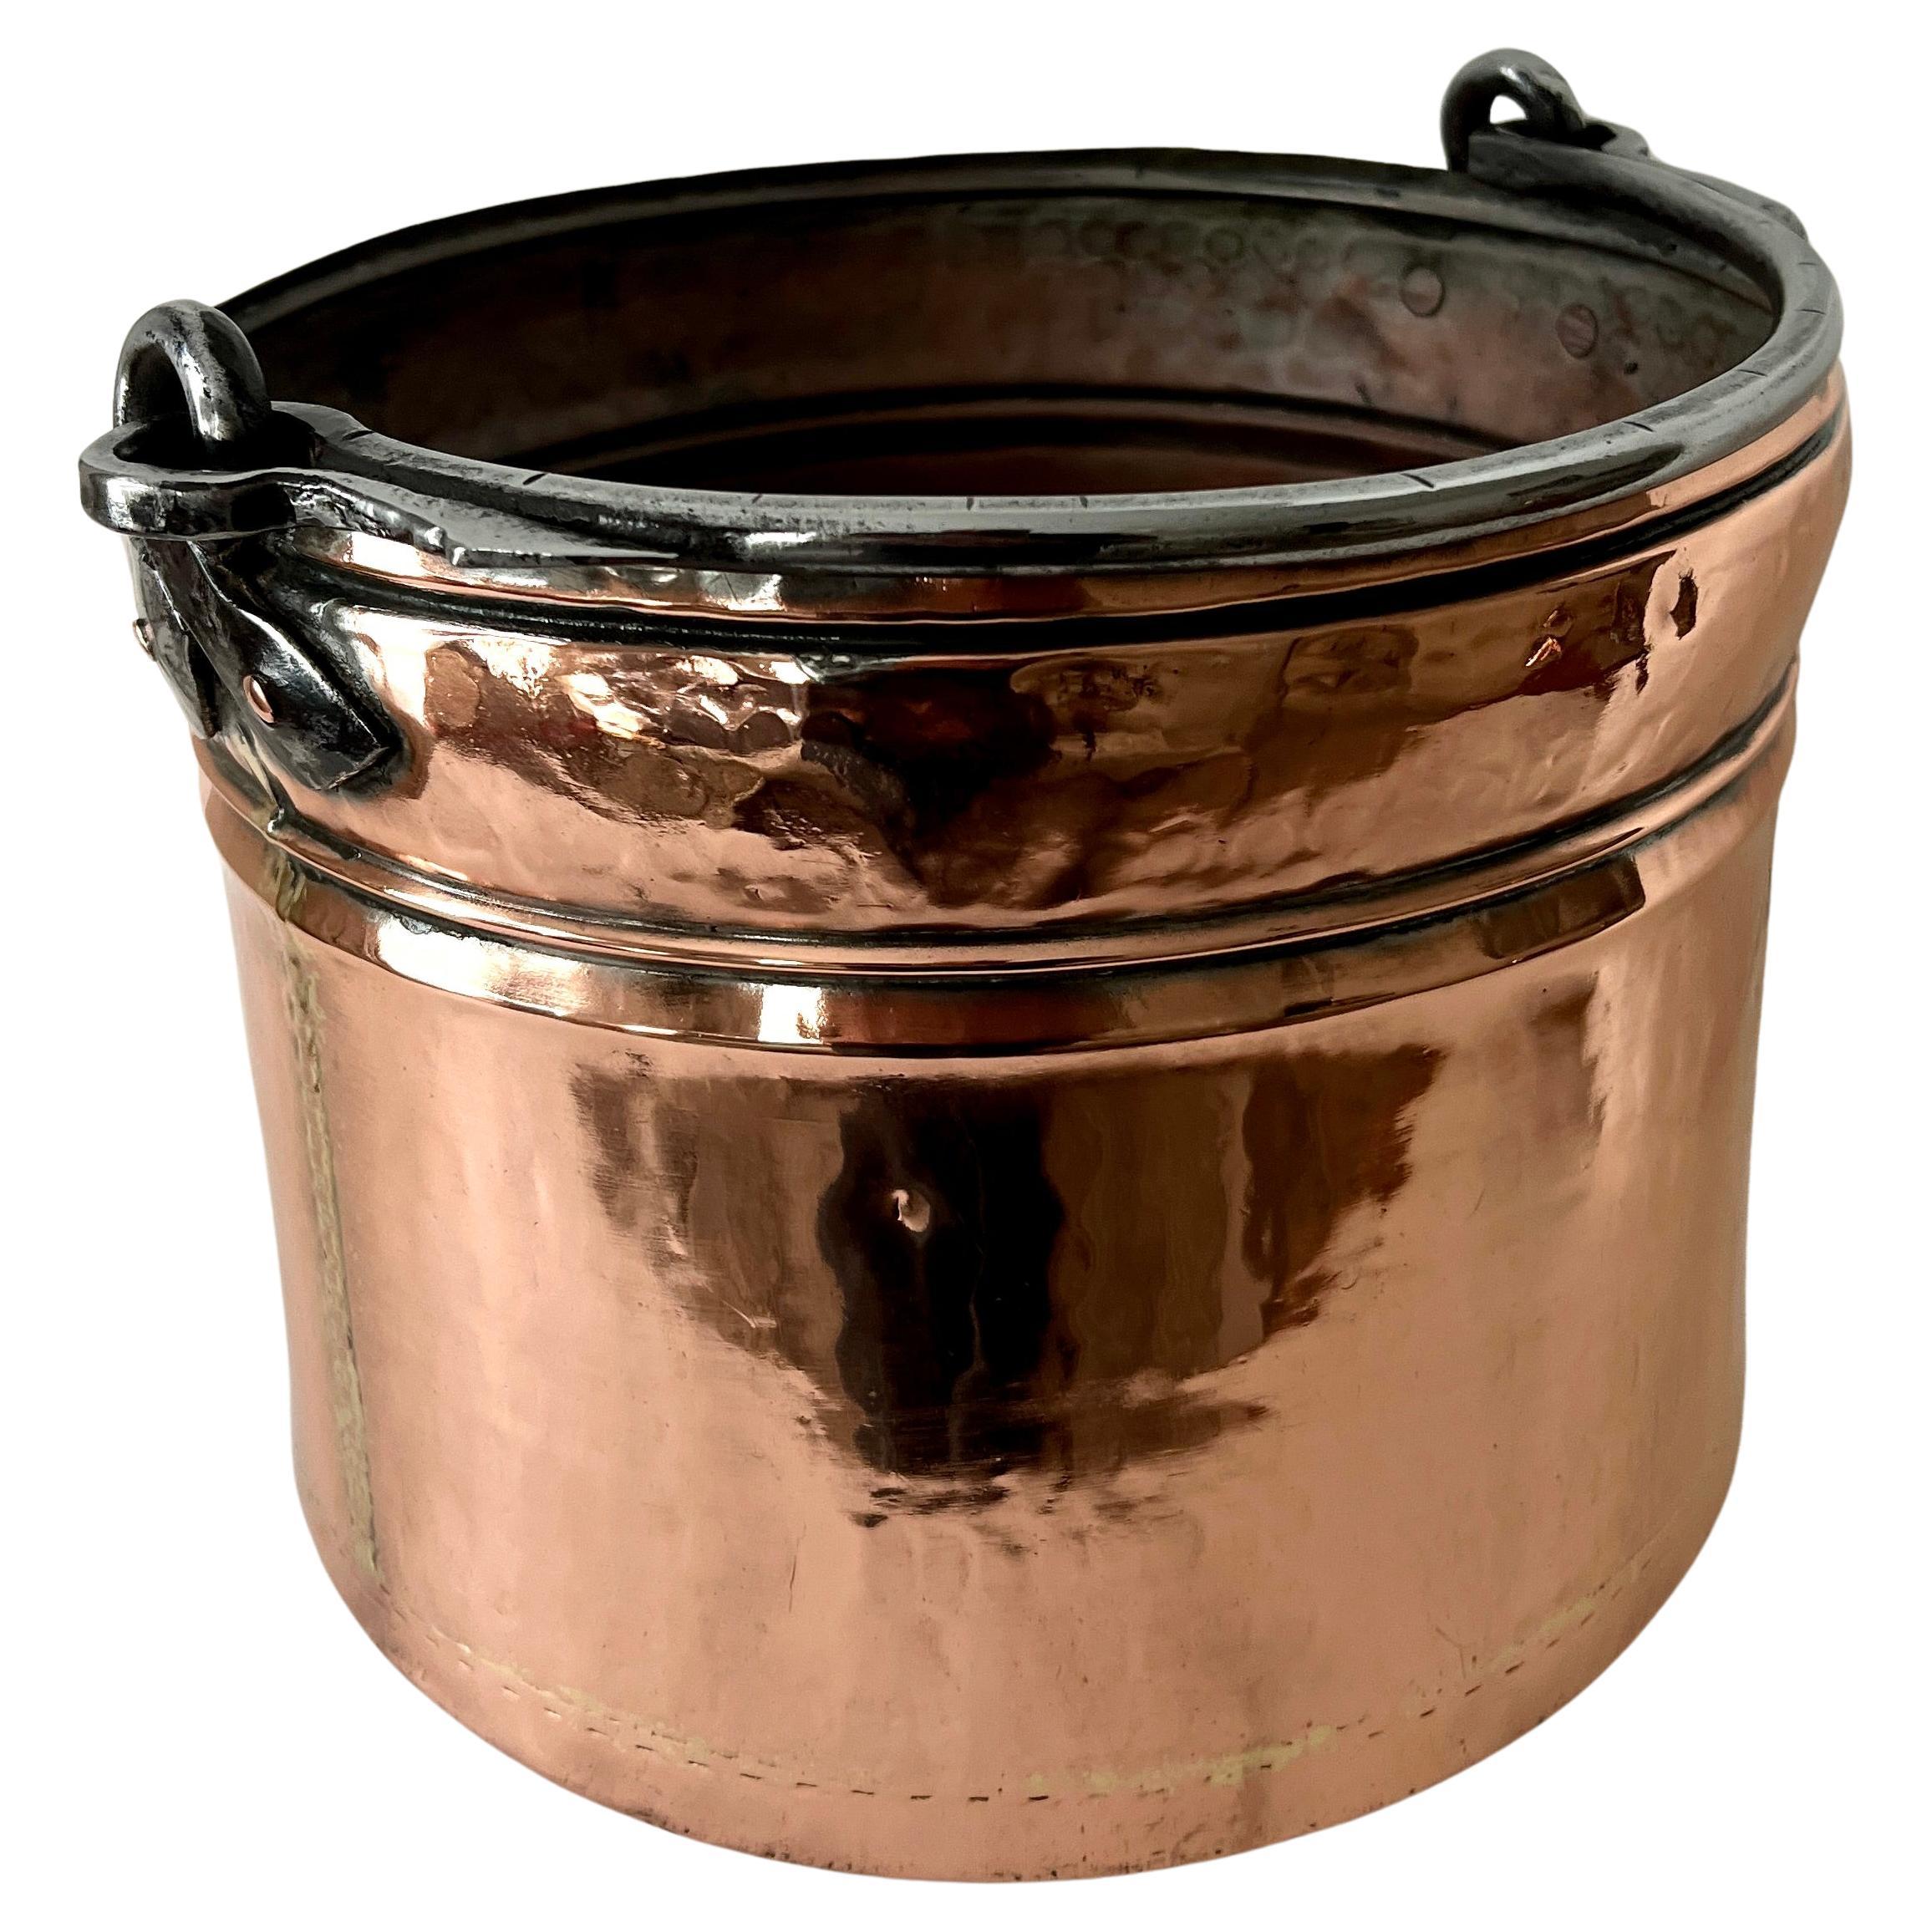 19th C. English Copper Cooking Pot or Planter or Jardiniere 